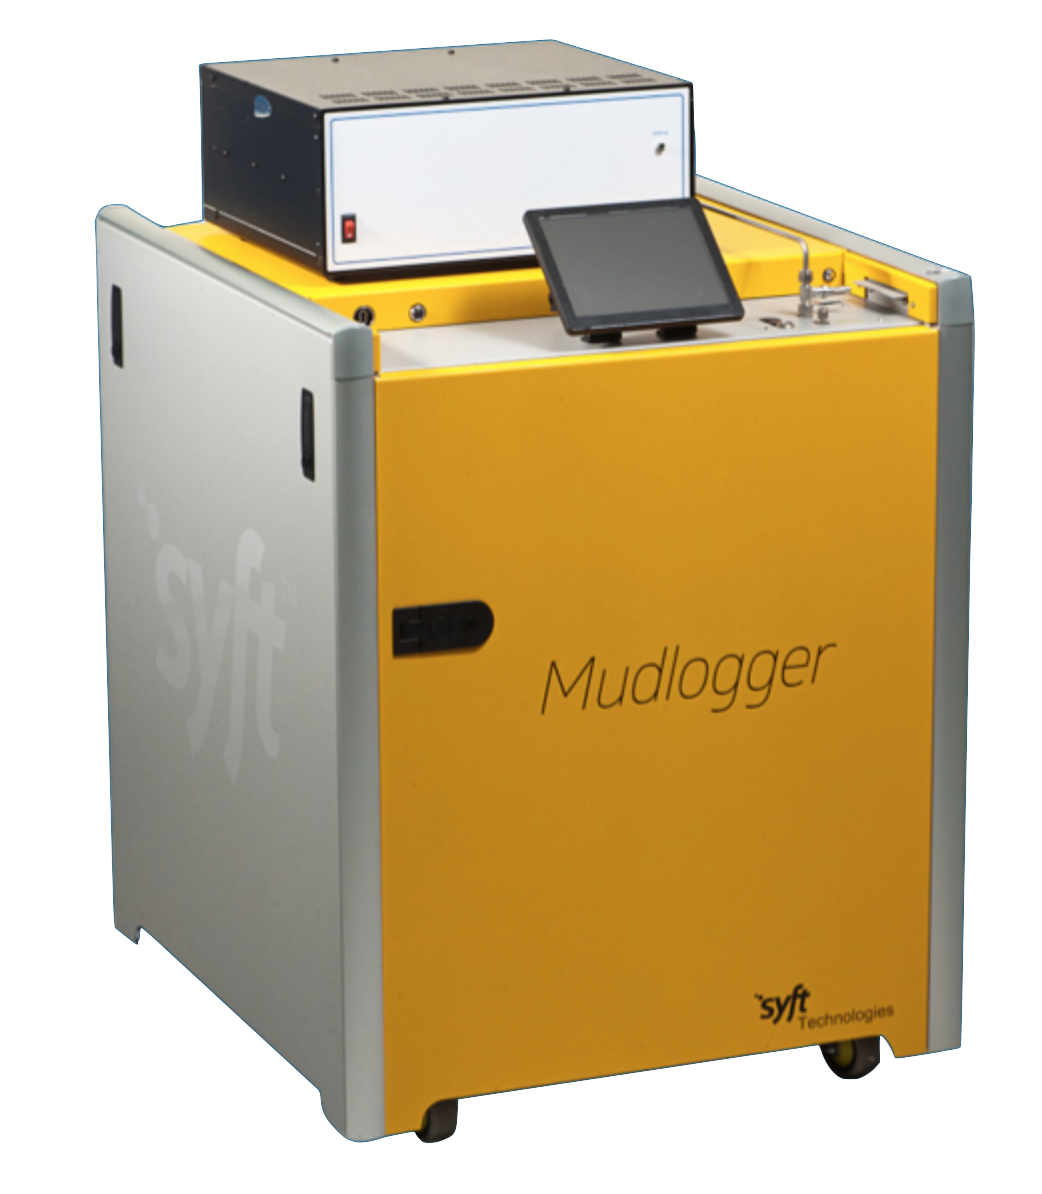 Mudlogger-Instrument-by-Syft-Technologies.png